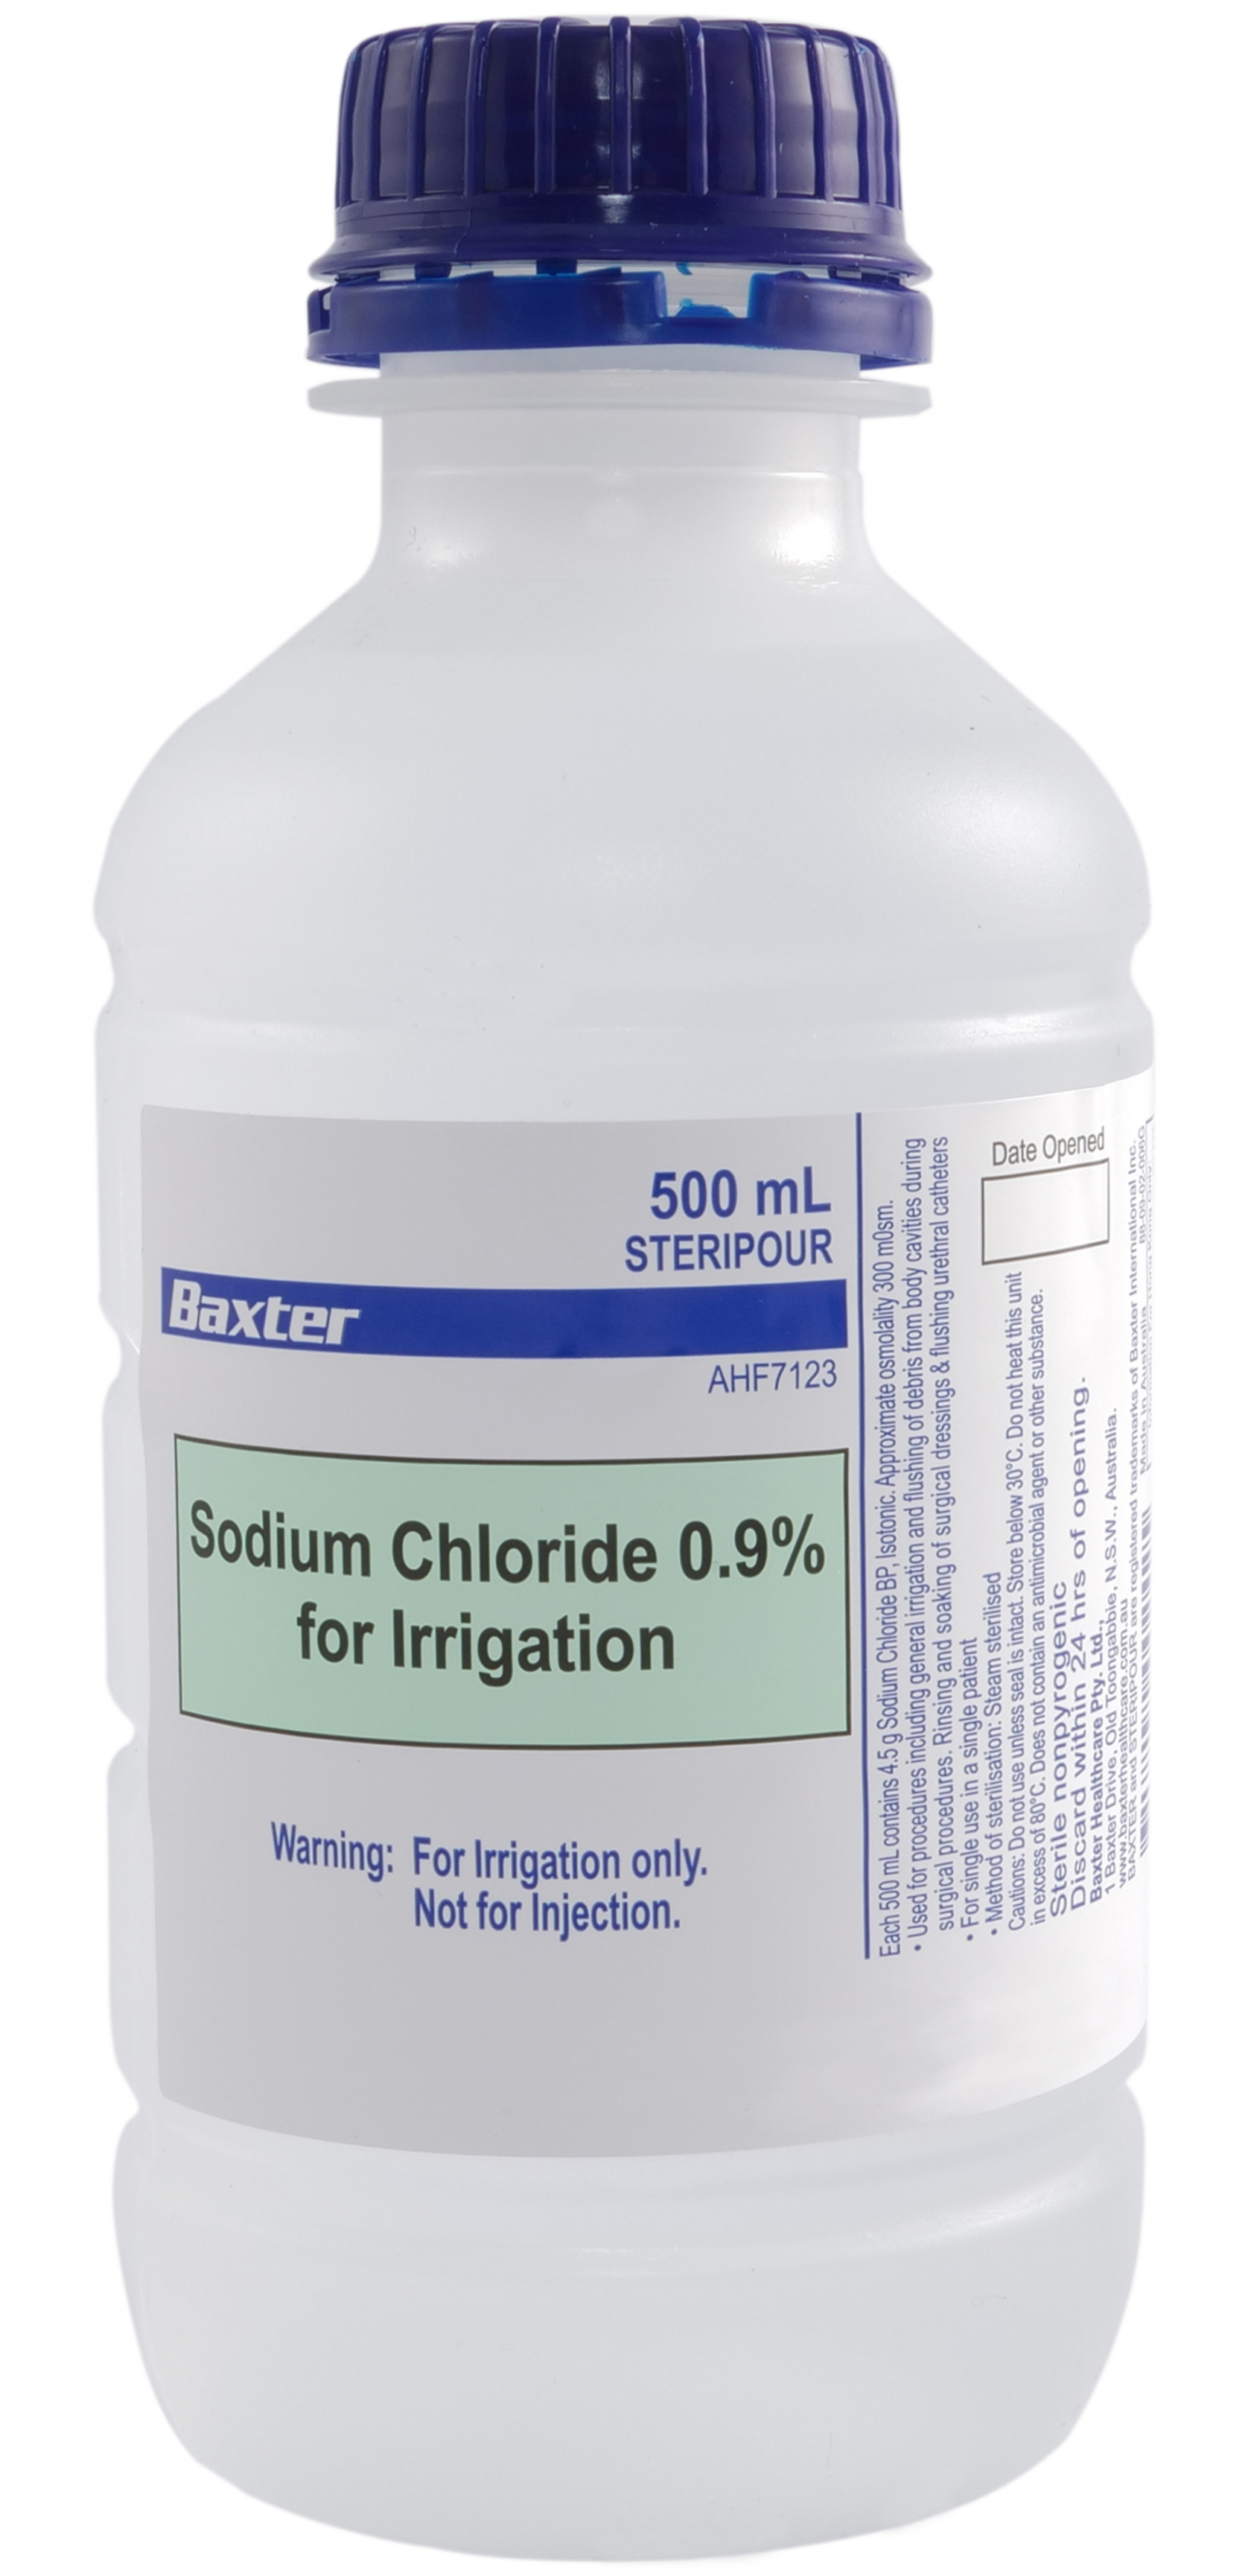 Sodium Chloride 0.9% Steripour Irrigation 500ml